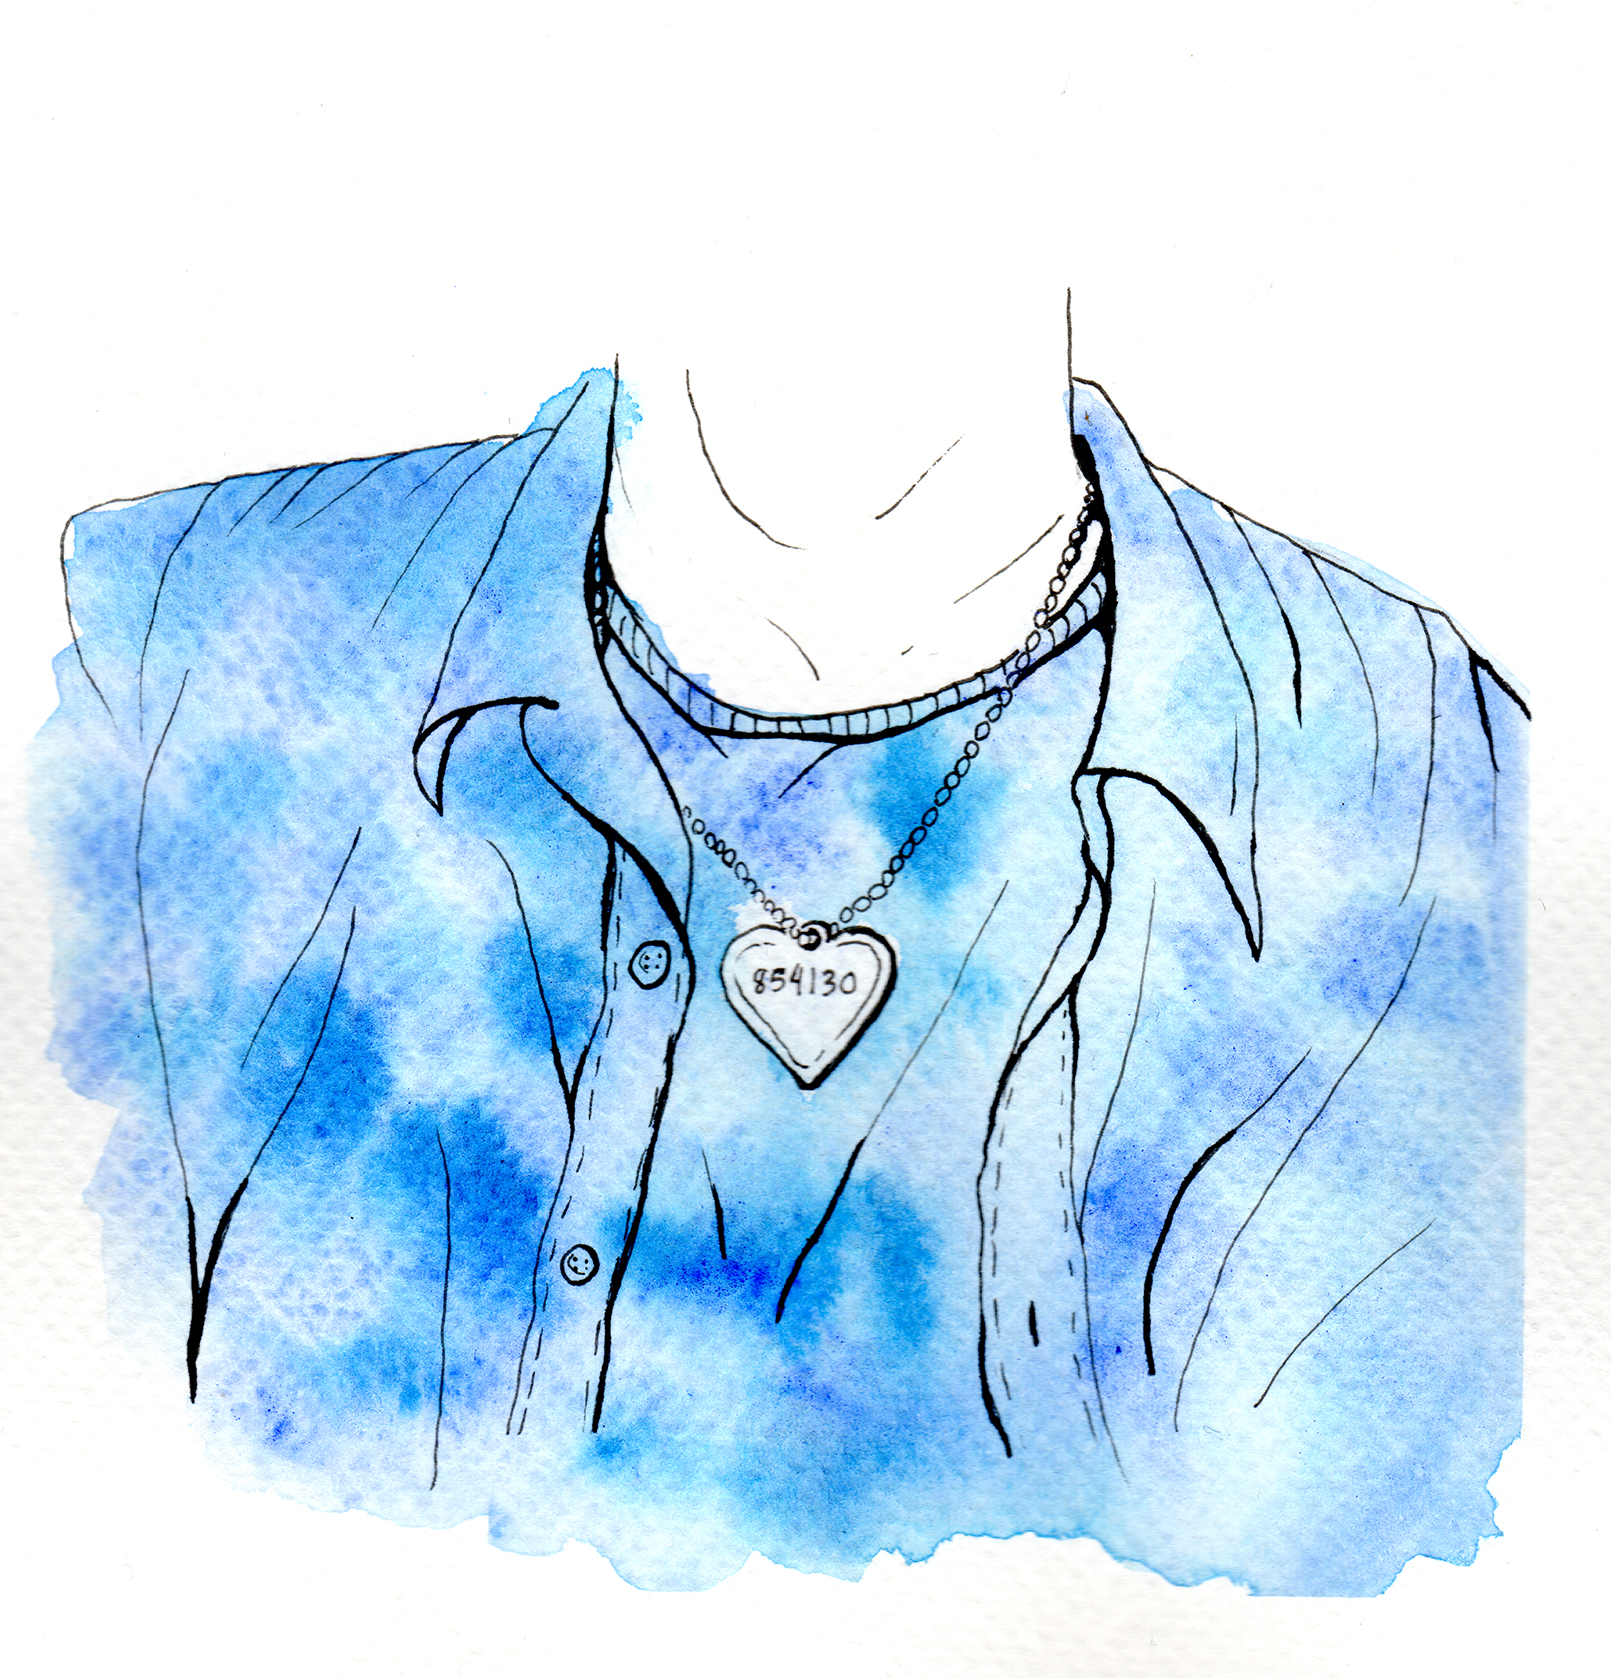 A drawing of a man's chest wearing a military dog tag with the numbers [] on it, the whole drawing is painted with a blue watercolor.